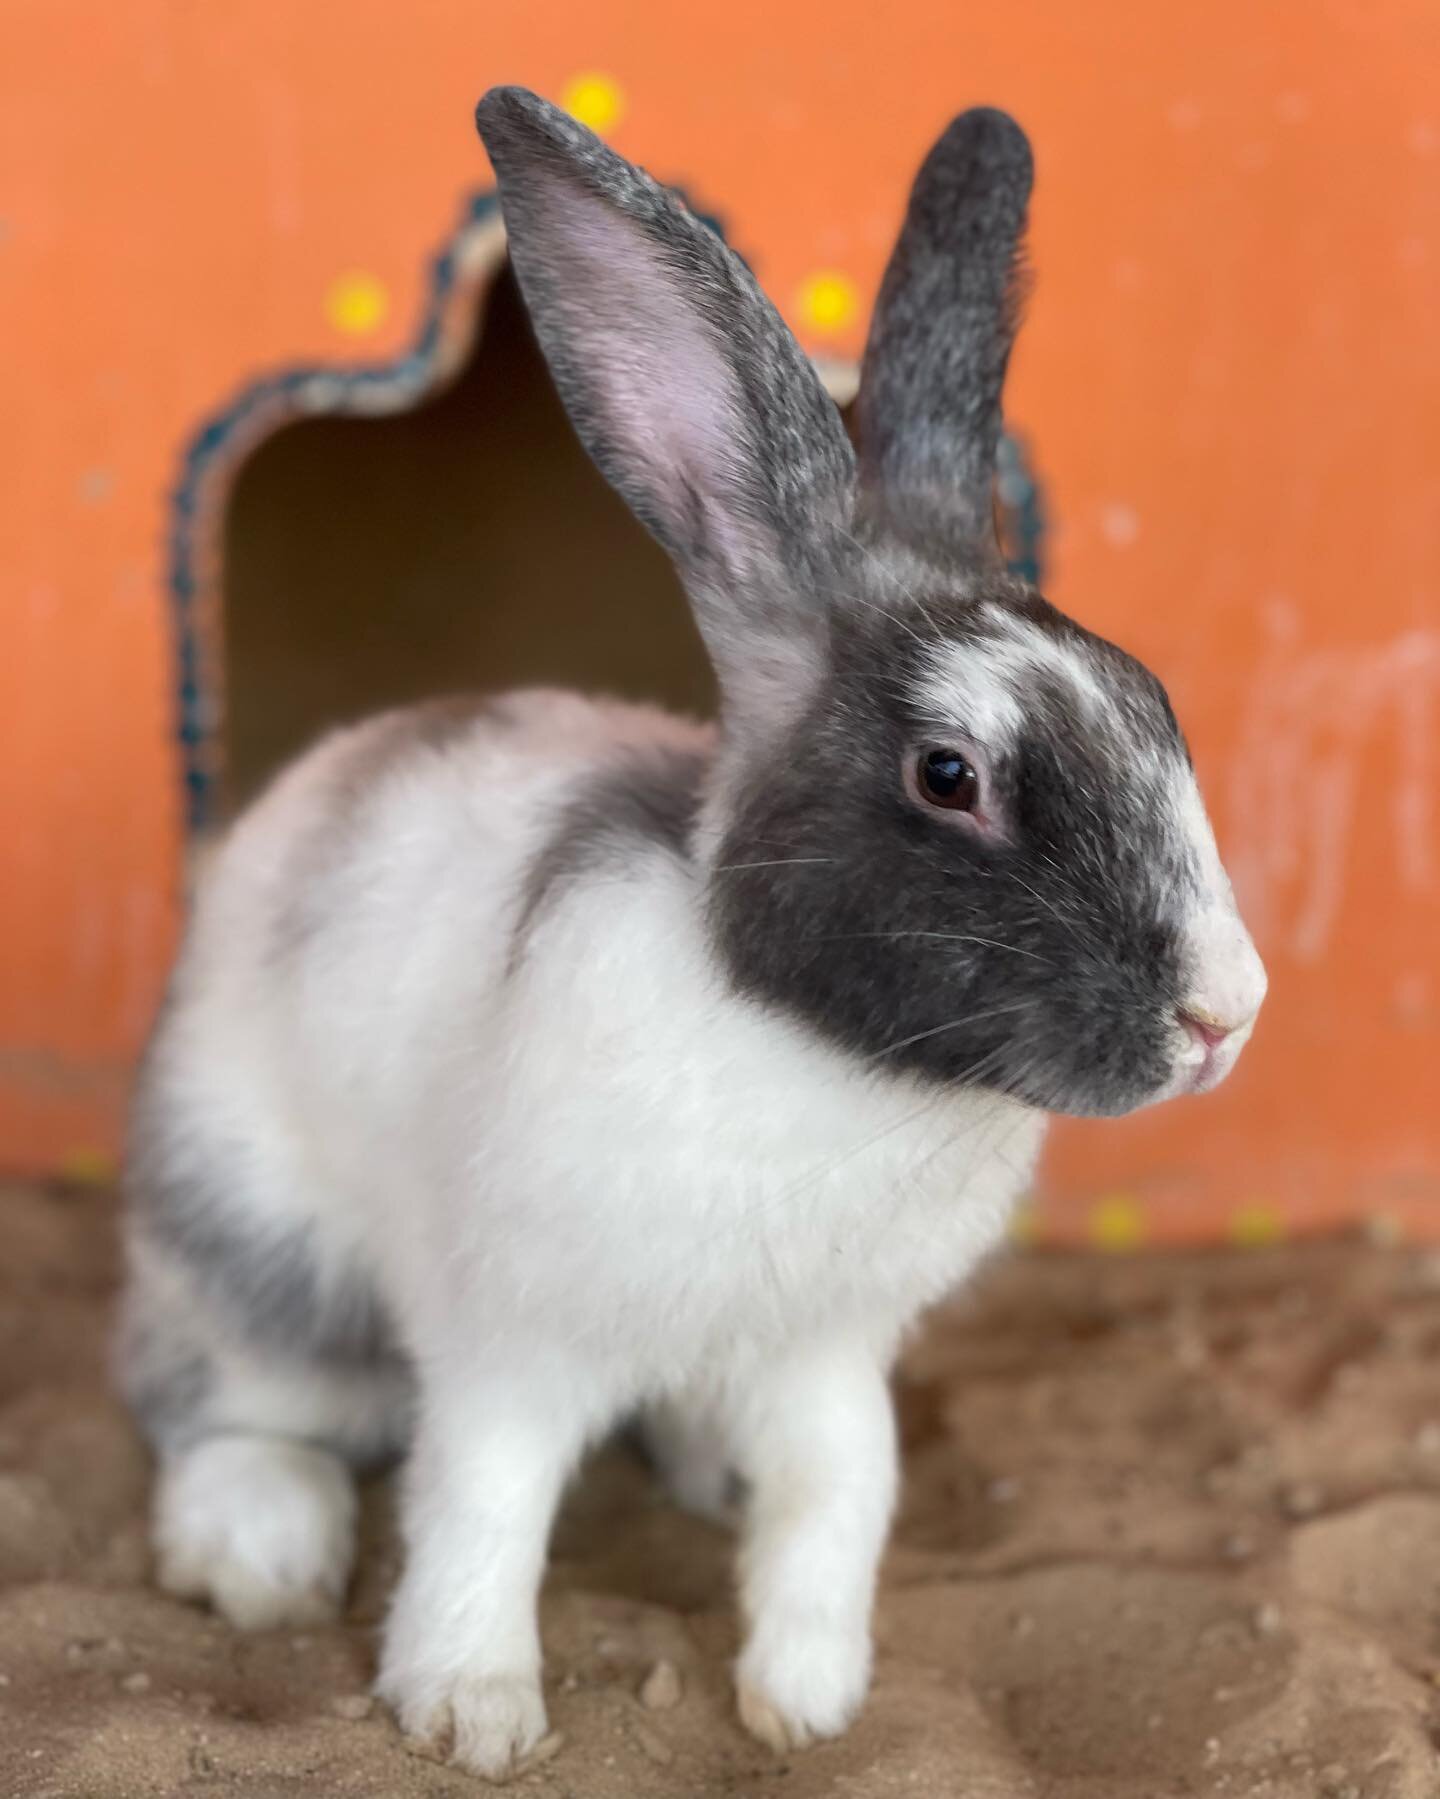 Have you met our new bunnies yet? We recently helped rescue some bunnies &amp; gave them a home with us at the farm 🐰

#dubai #dxb #emirates #desert #sand #dunes #middleeast #rabbits #bunnies #rescuedanimals #animals #babyanimals #thecamelfarm #came